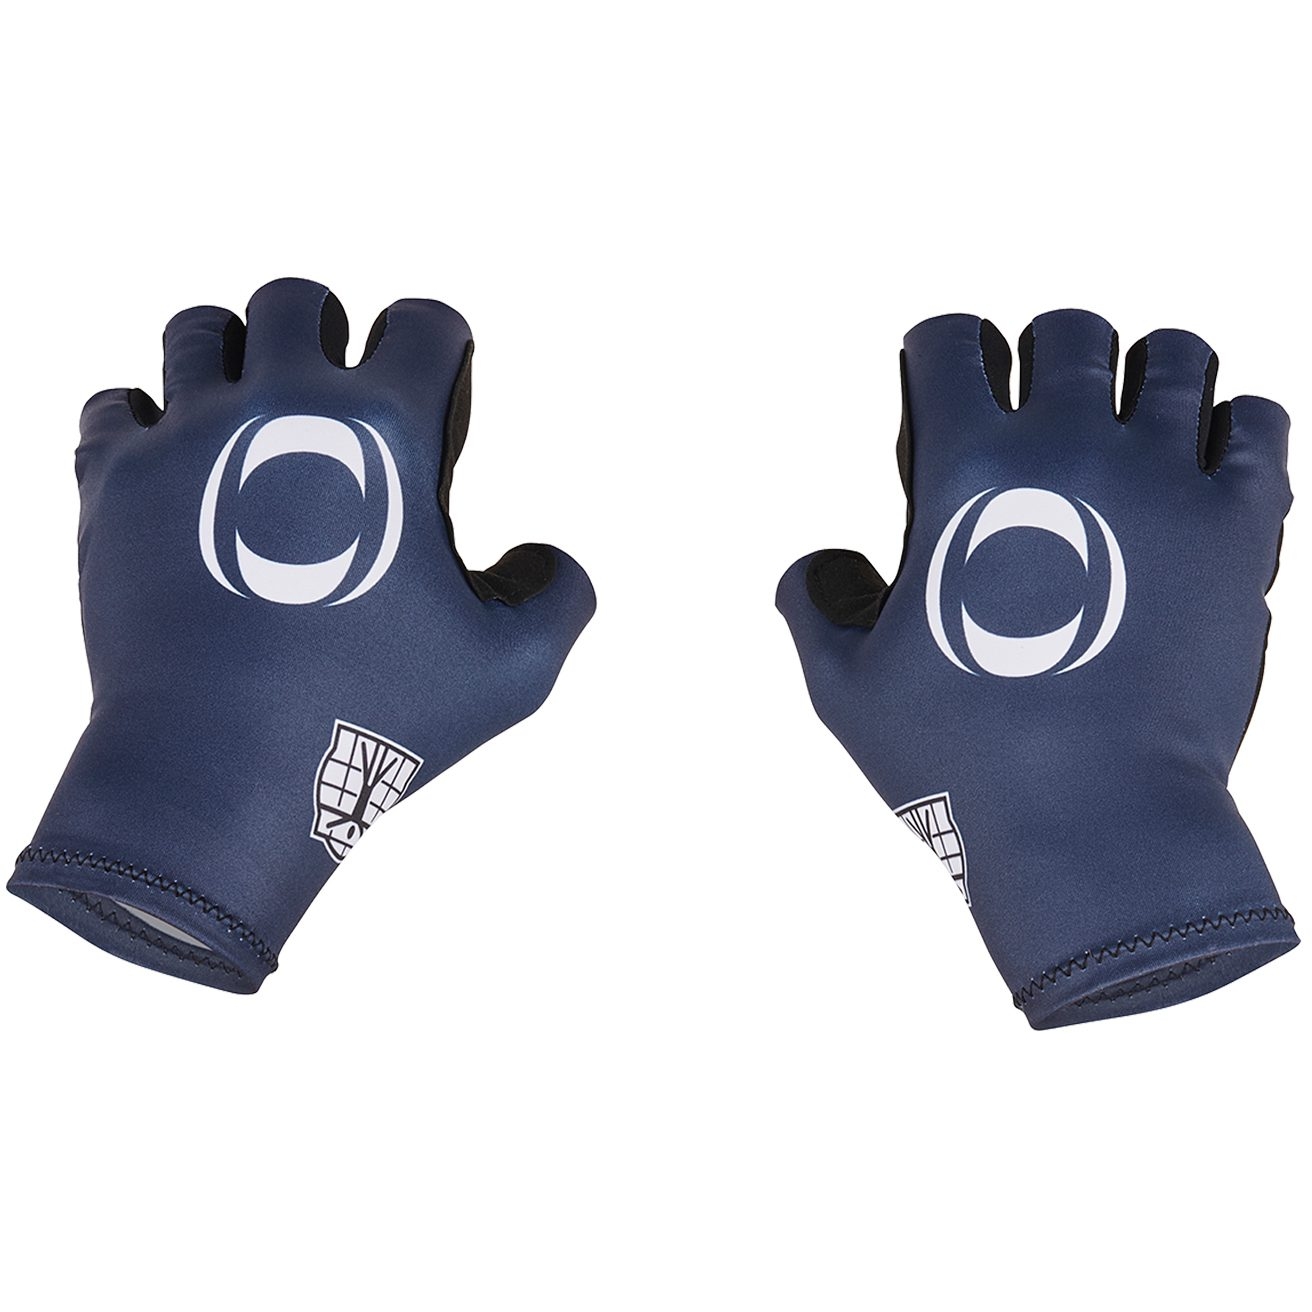 Picture of Bioracer Ineos Grenadiers Summer Gloves - navy blue